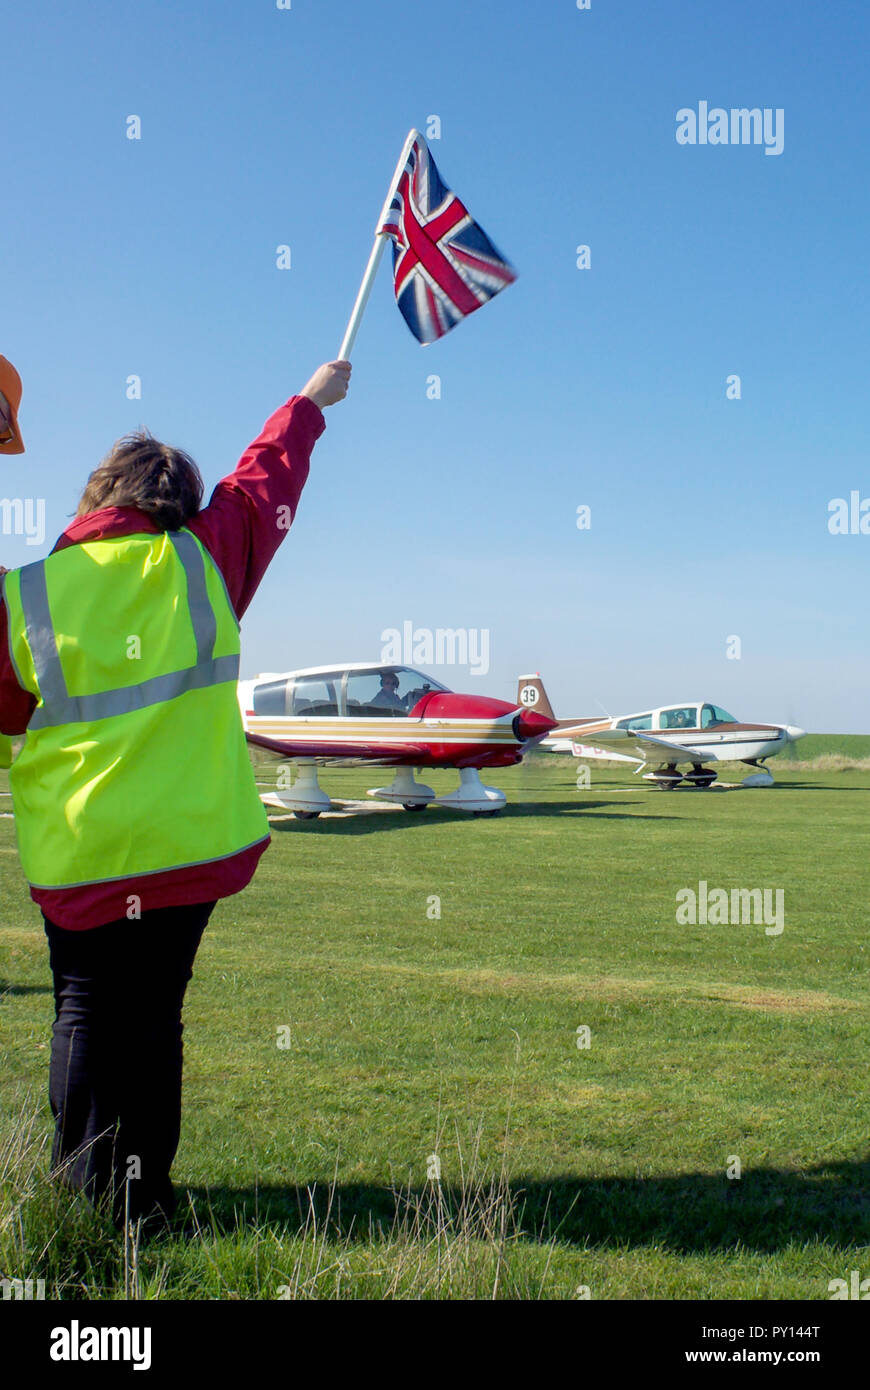 Start of the Royal Aero Club RAeC Air Race Series at Great Oakley airfield, Essex, UK. Private flying. Raised flag ready to drop. British Union Flag Stock Photo